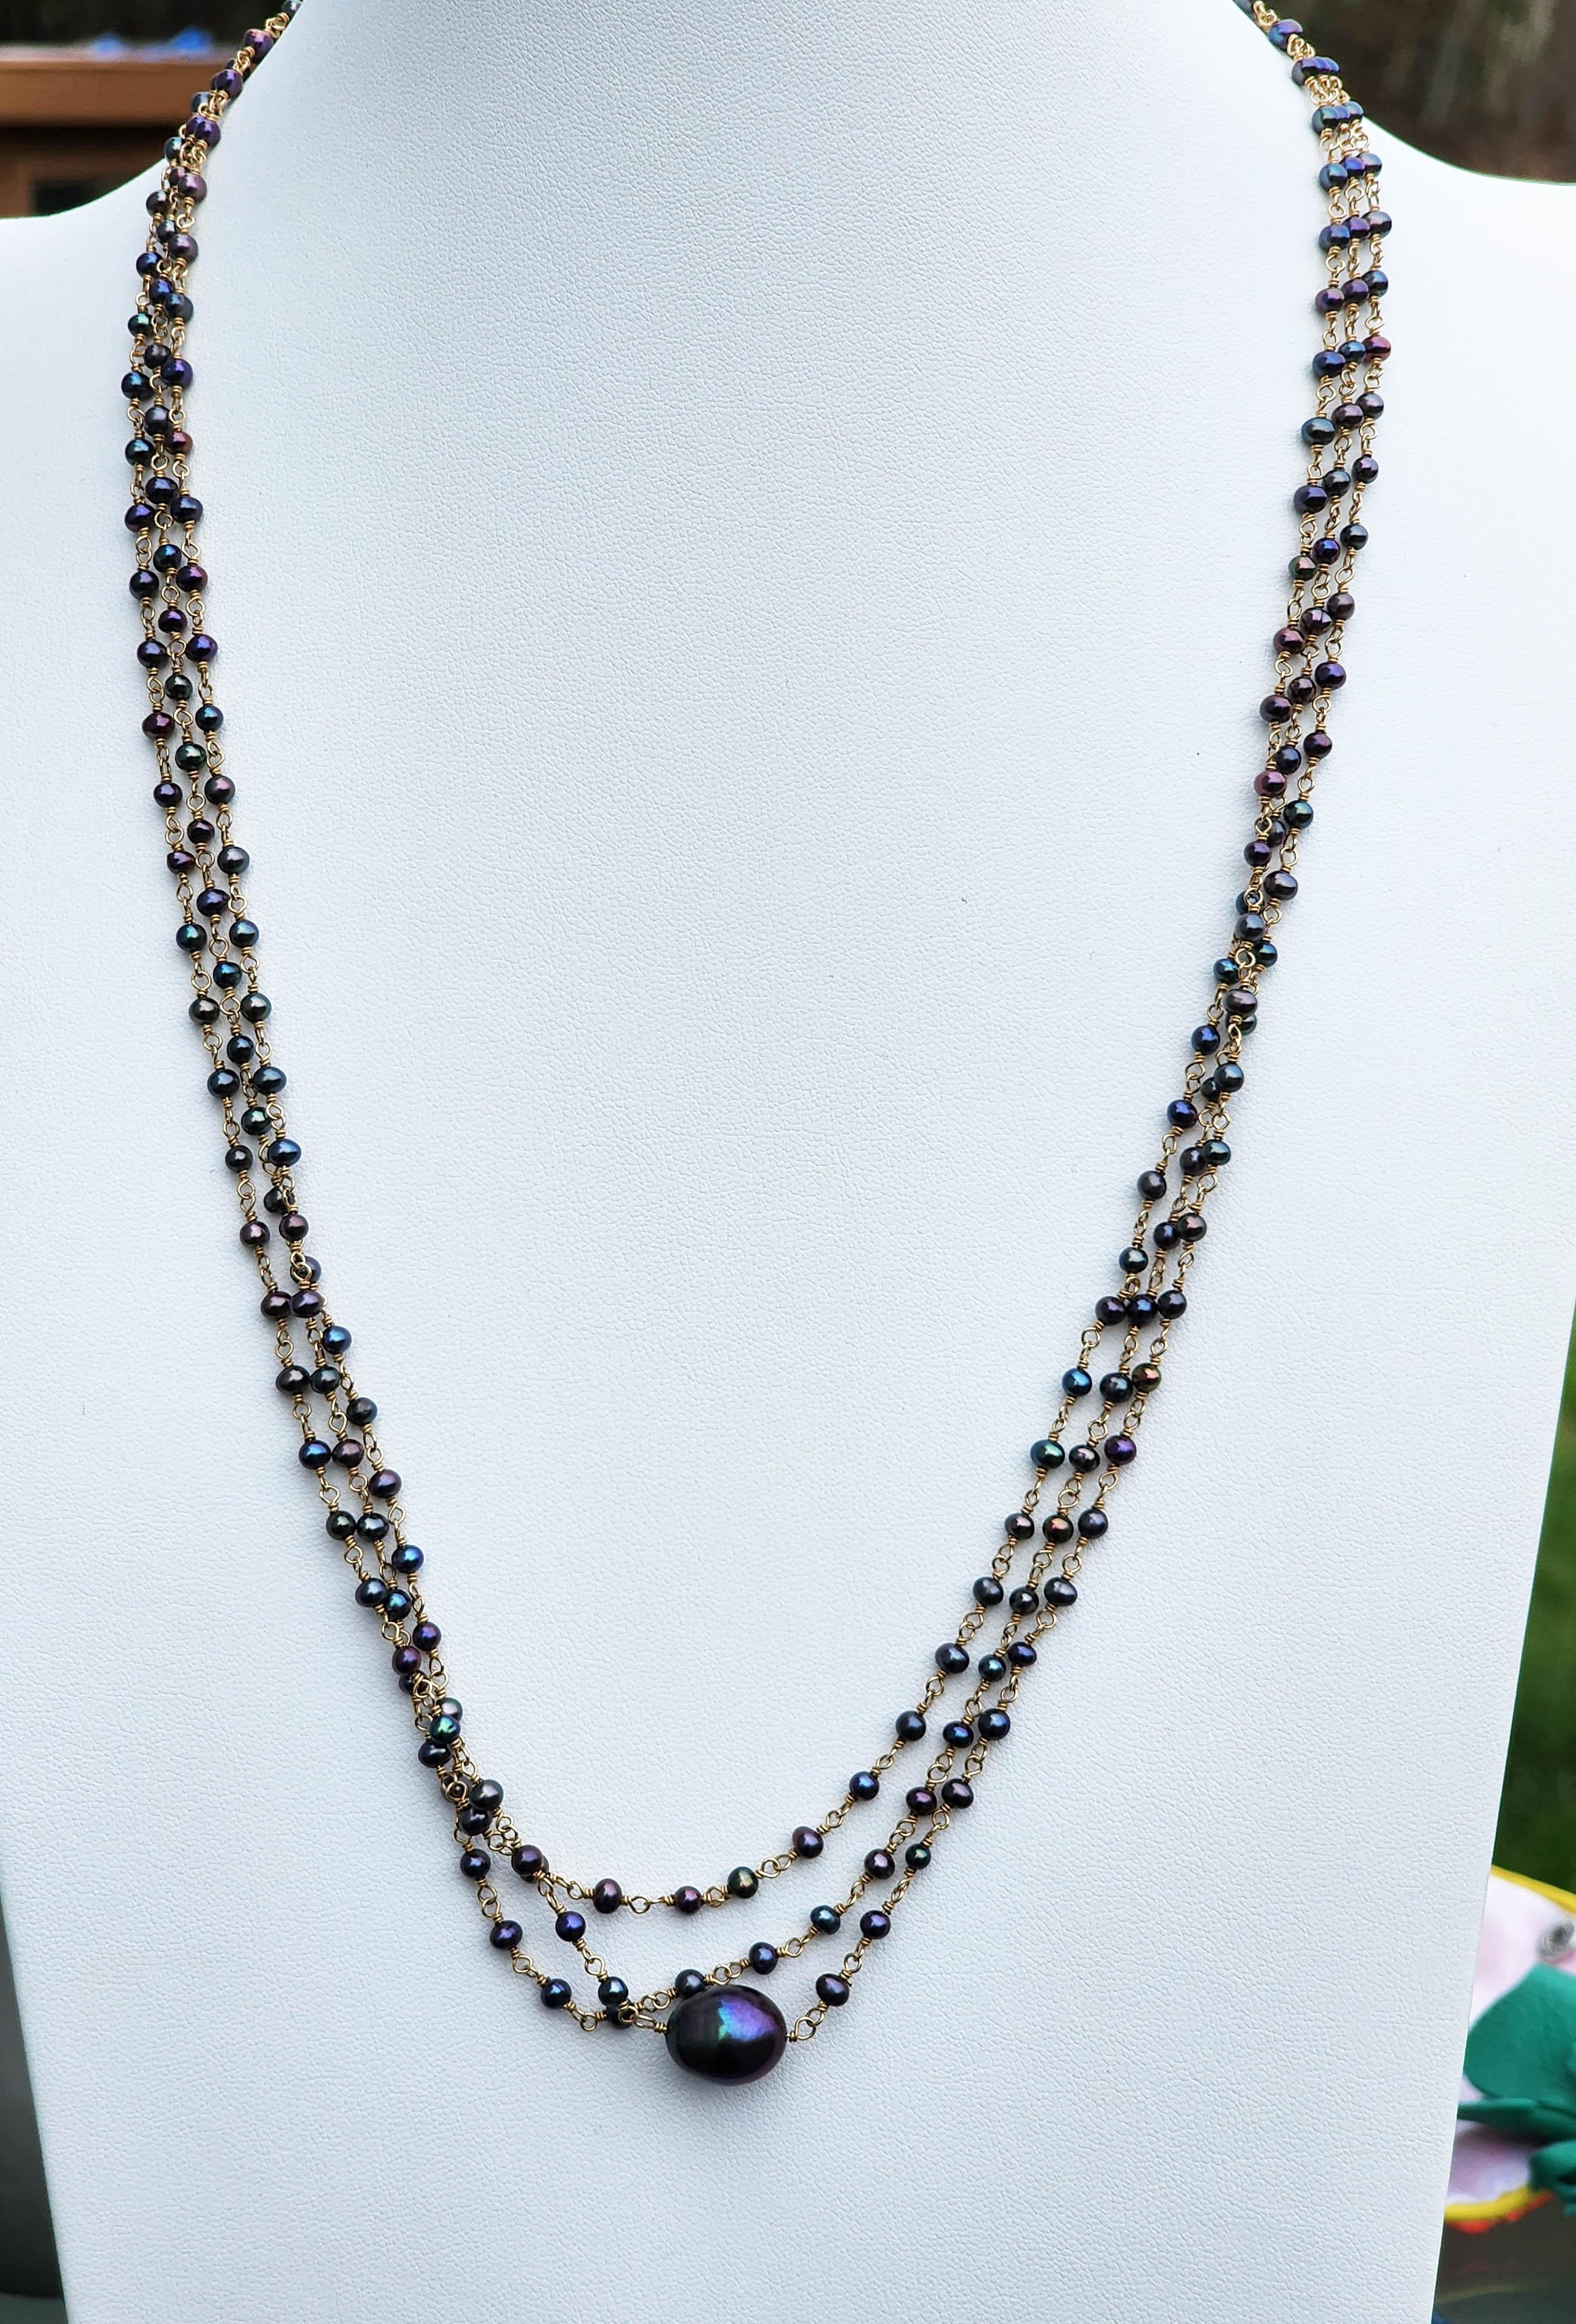 Bead A South Sea Pearl Neckalce of 75 inches For Sale